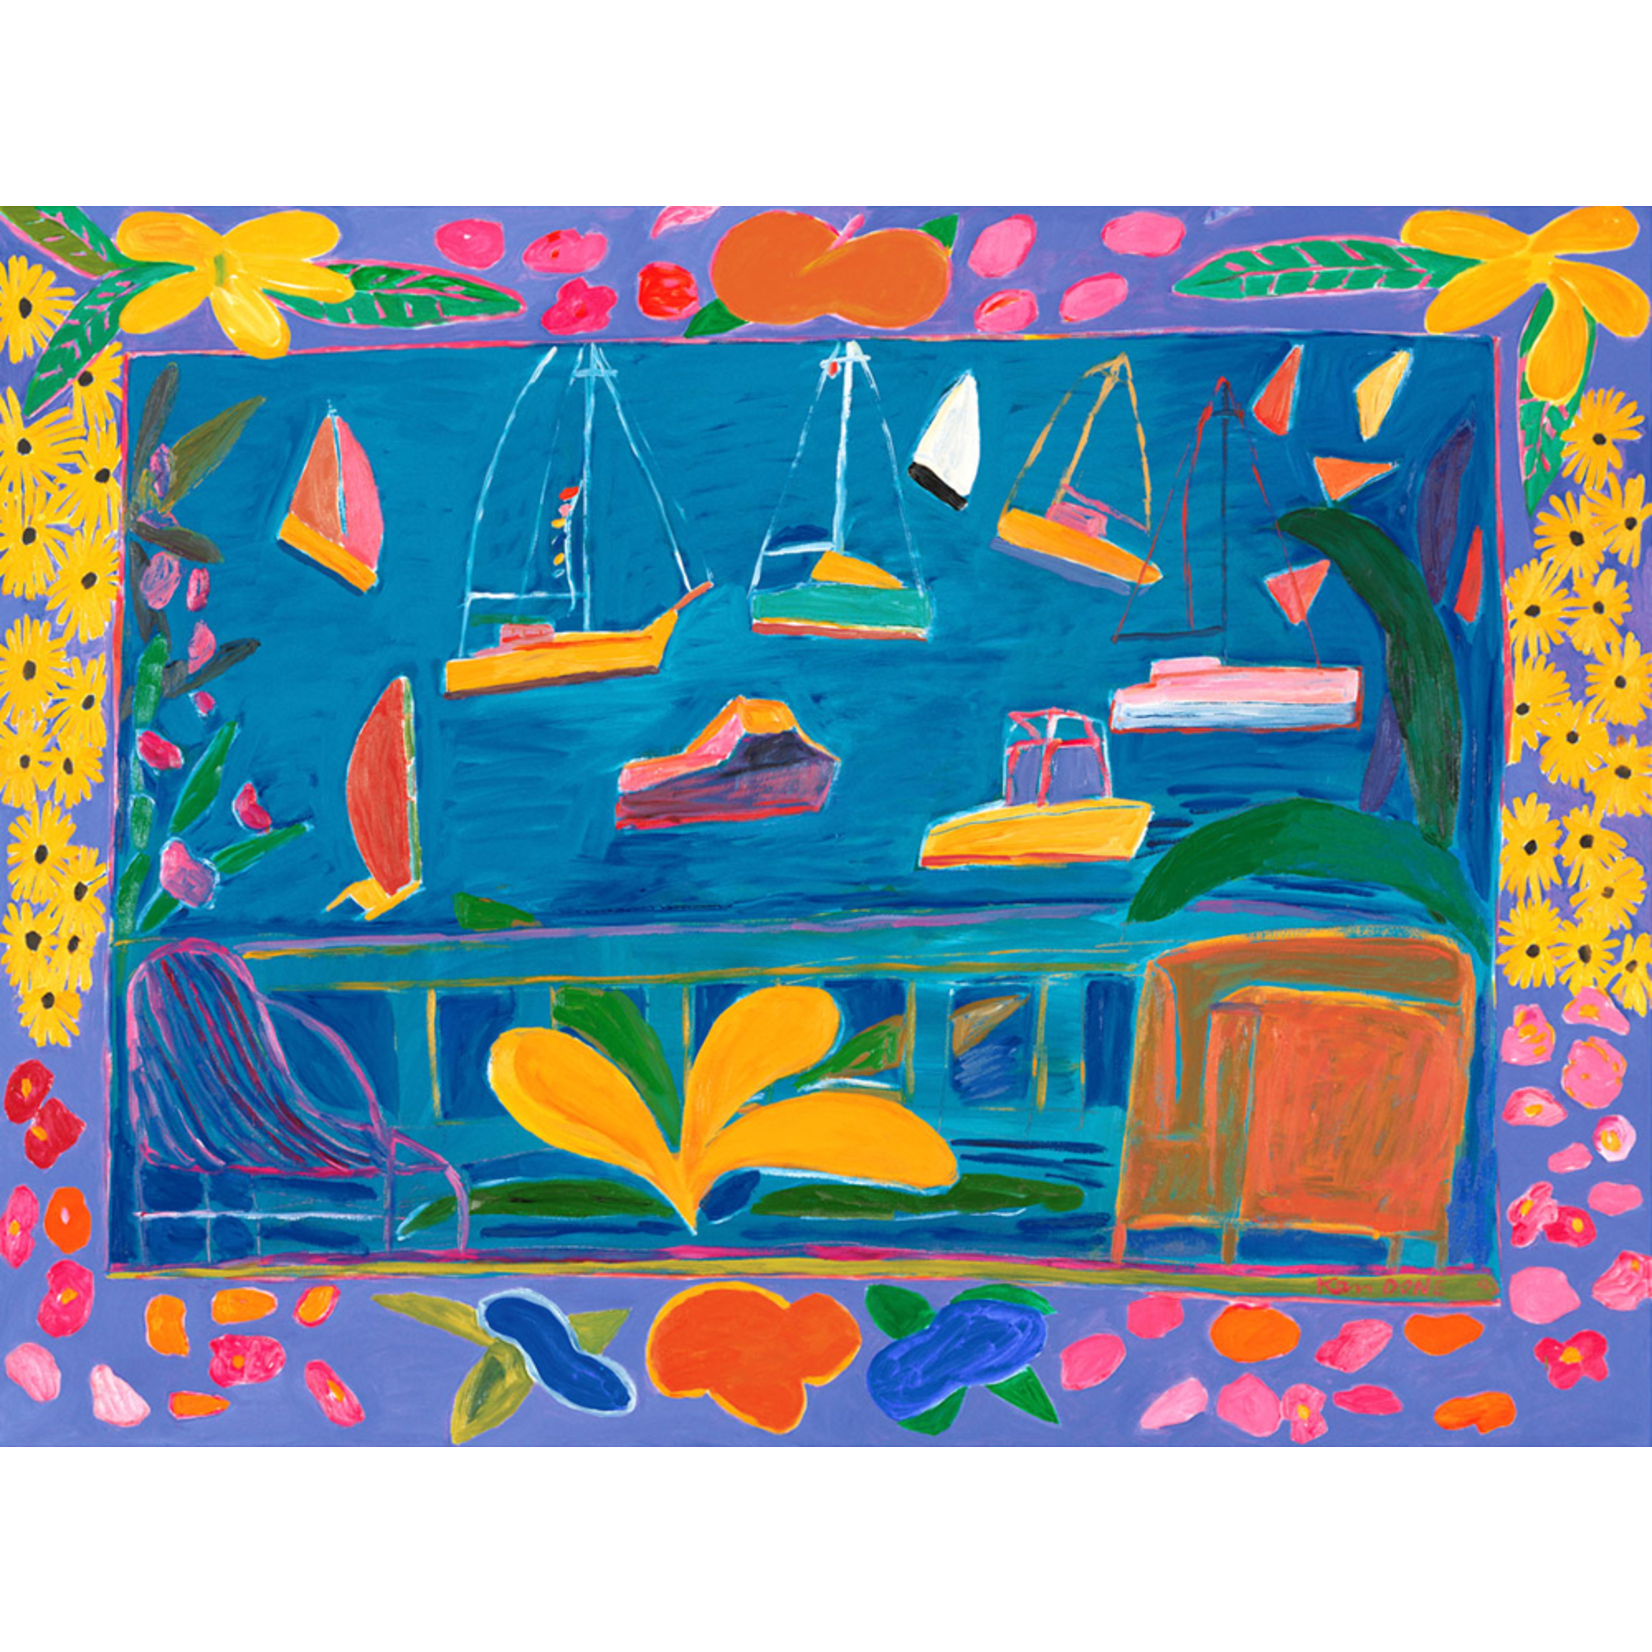 Limited Edition Prints Painting from the Cabin, 1993